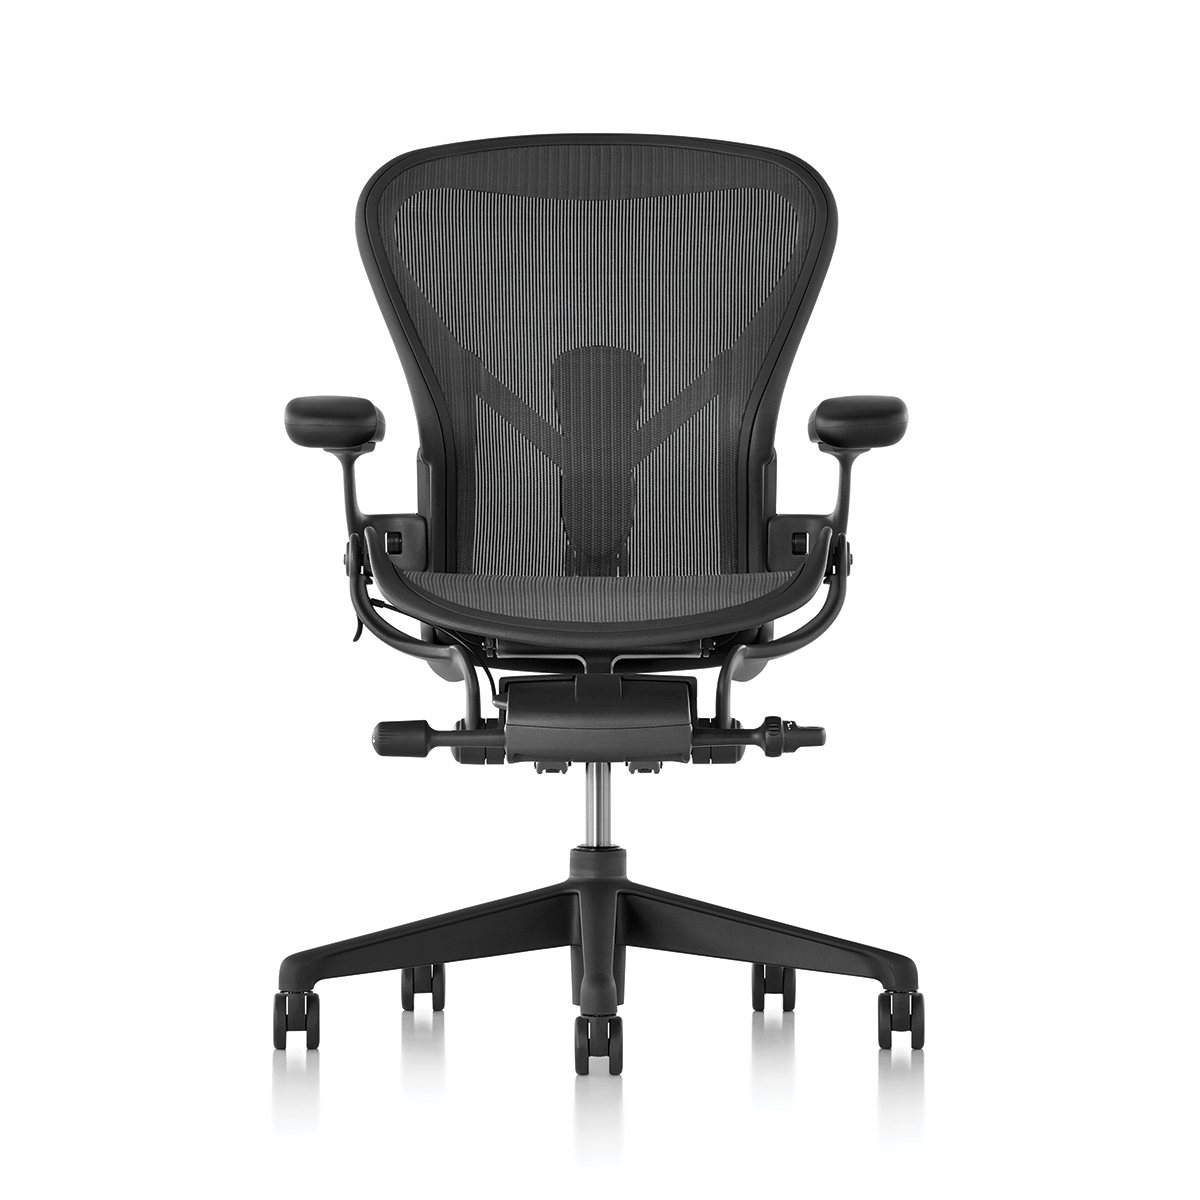 Chair With Posture Fit – -